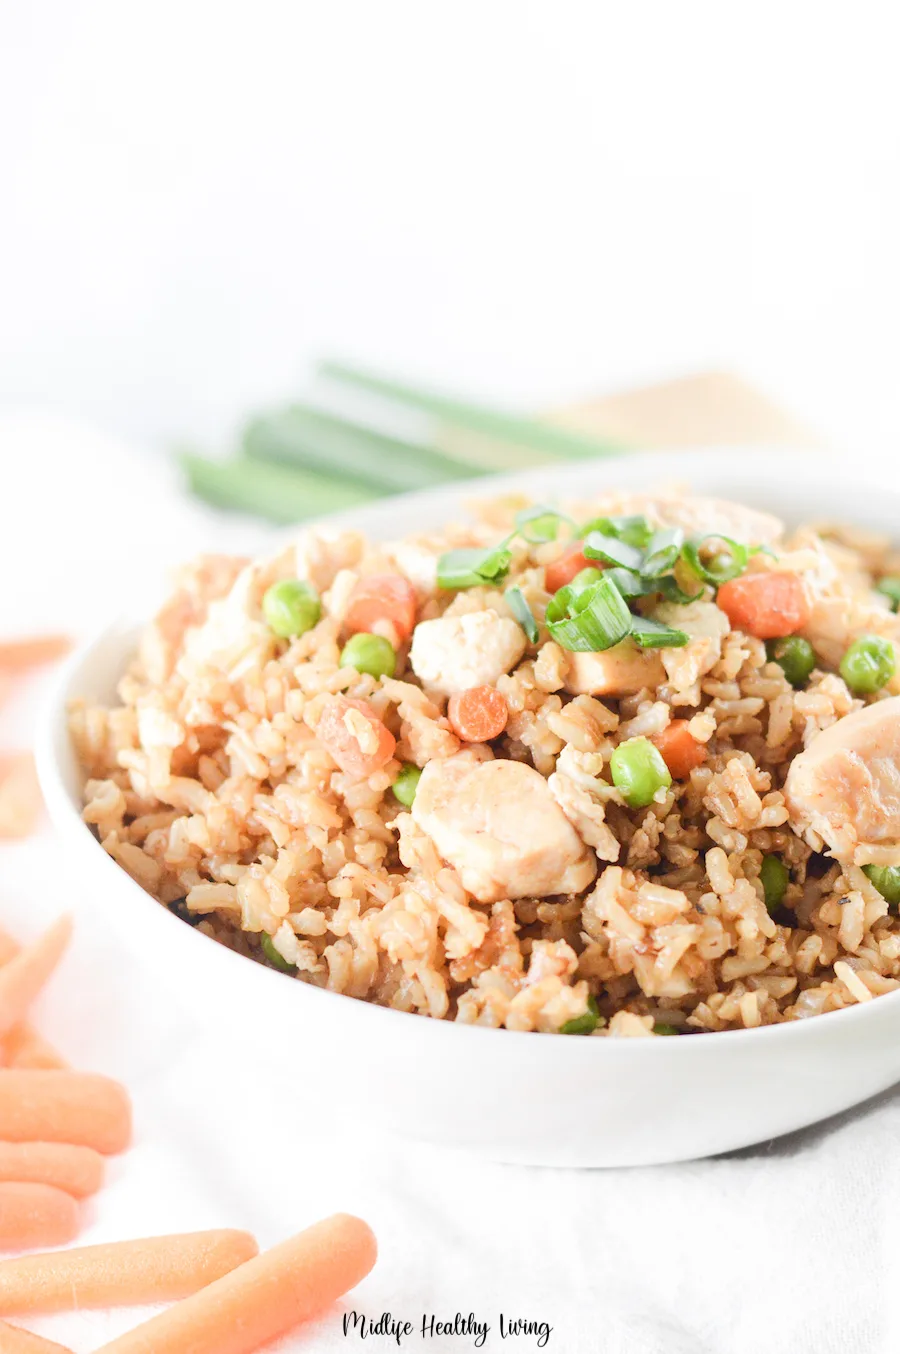 A look at the finished bowl of the healthy chicken fired rice.